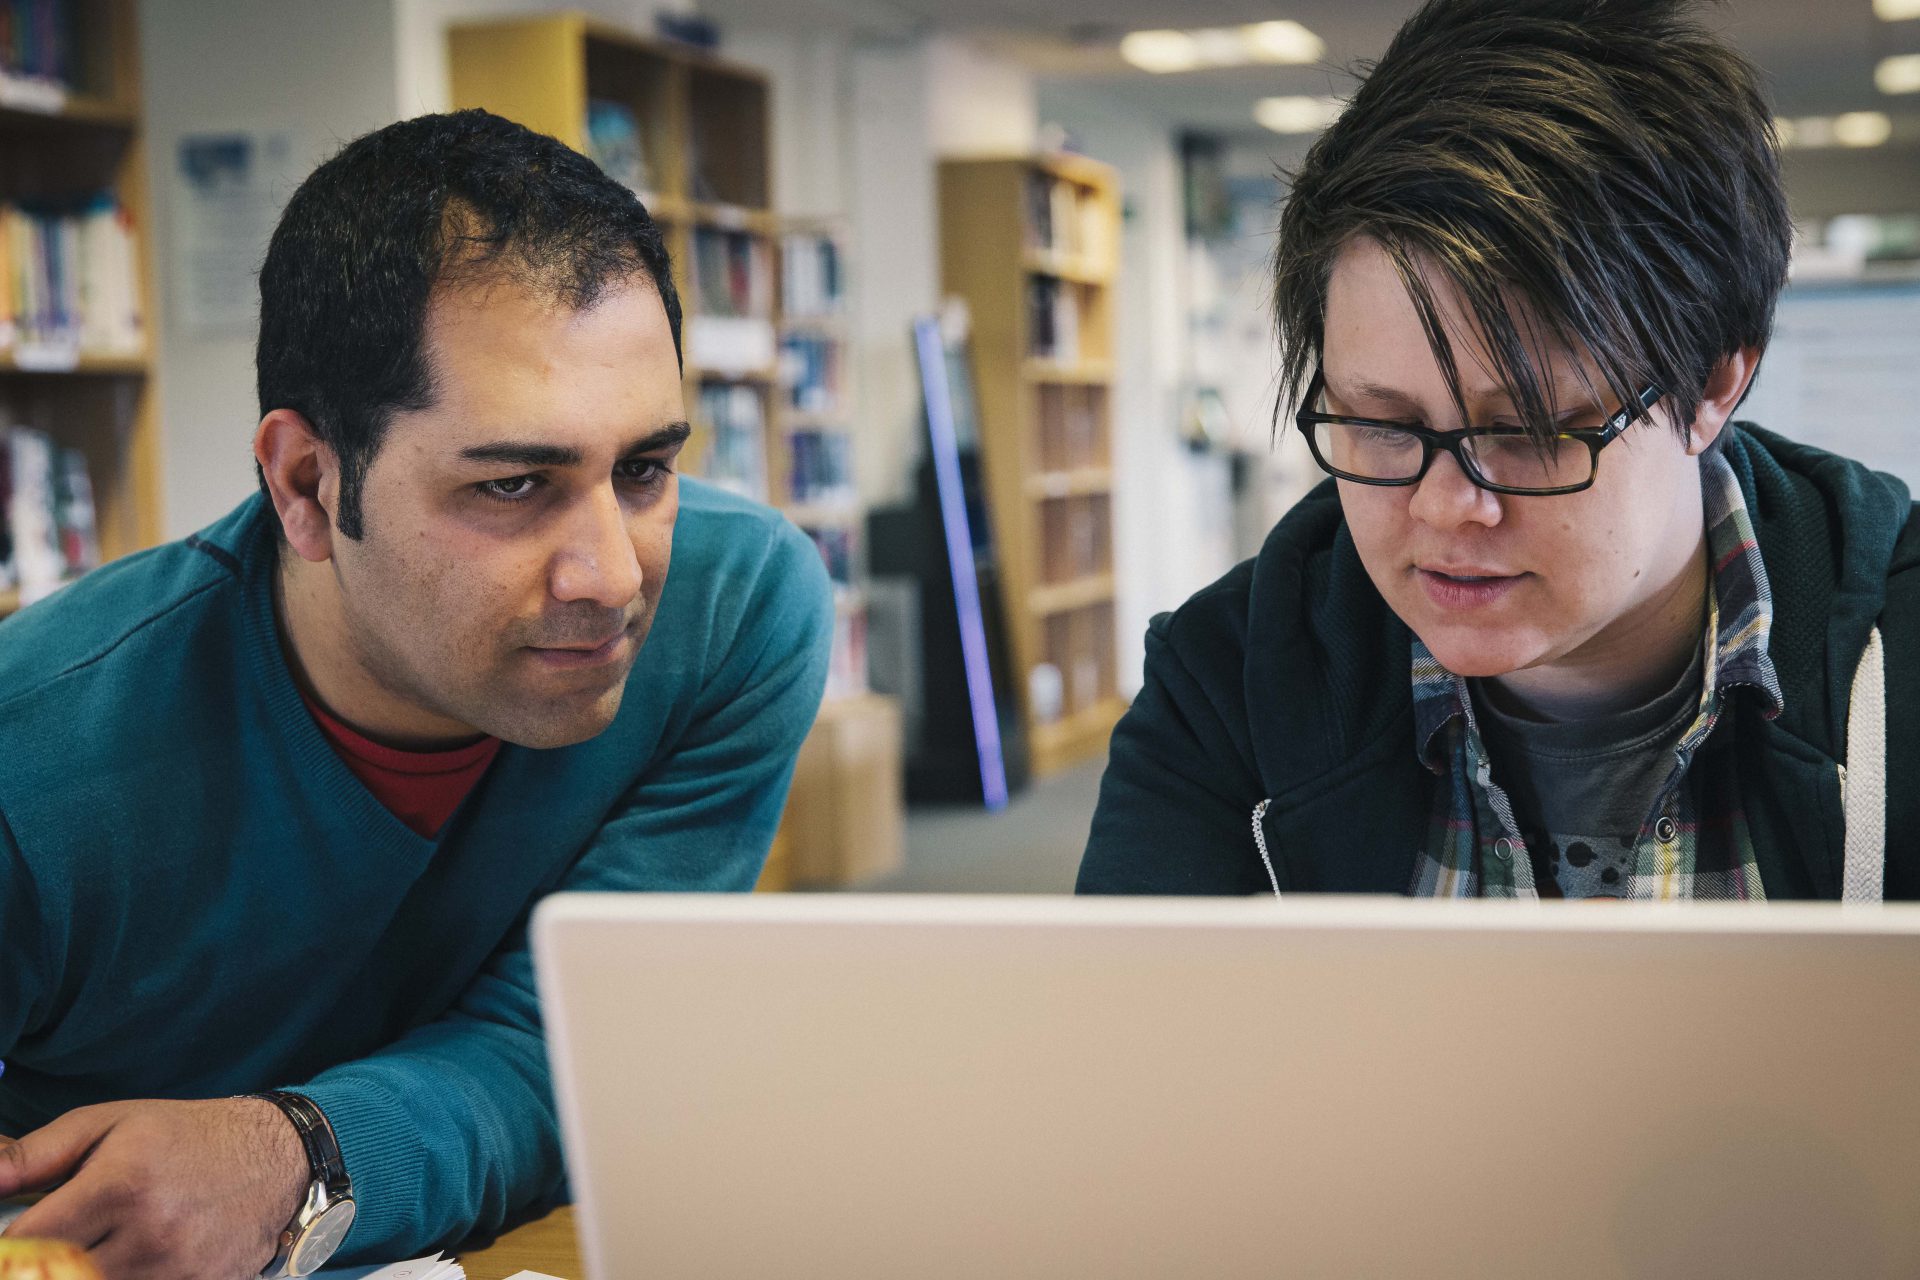 Hirad Babakhani and Anna Nicholls work on a laptop in Ashley Down Library